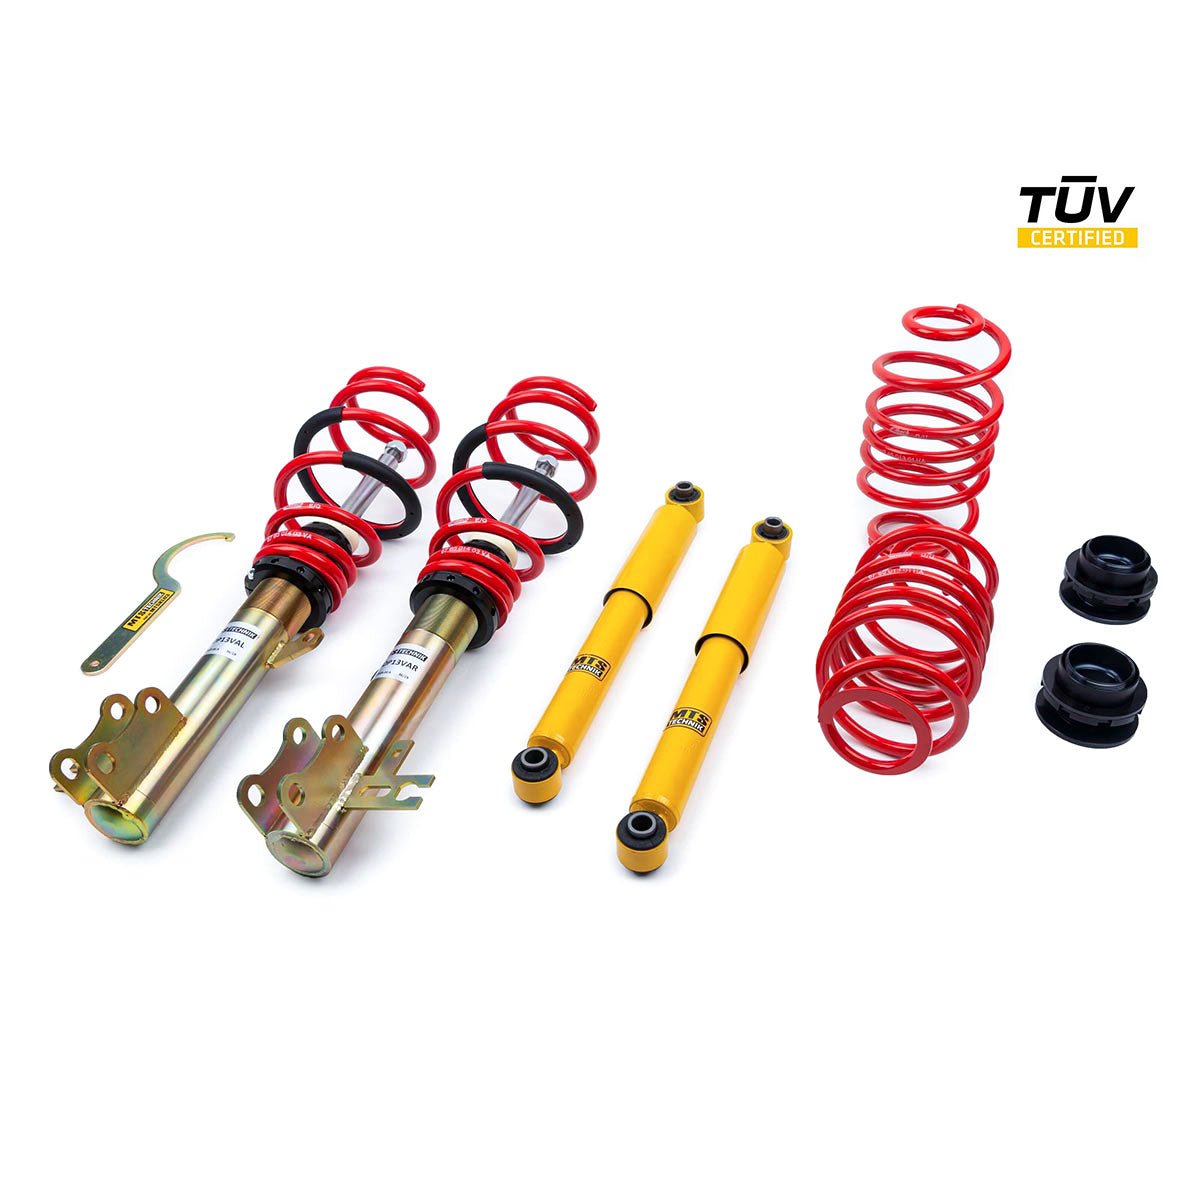 MTS TECHNIK coilover kit STREET Opel Astra H Hatchback (with TÜV) - PARTS33 GmbH